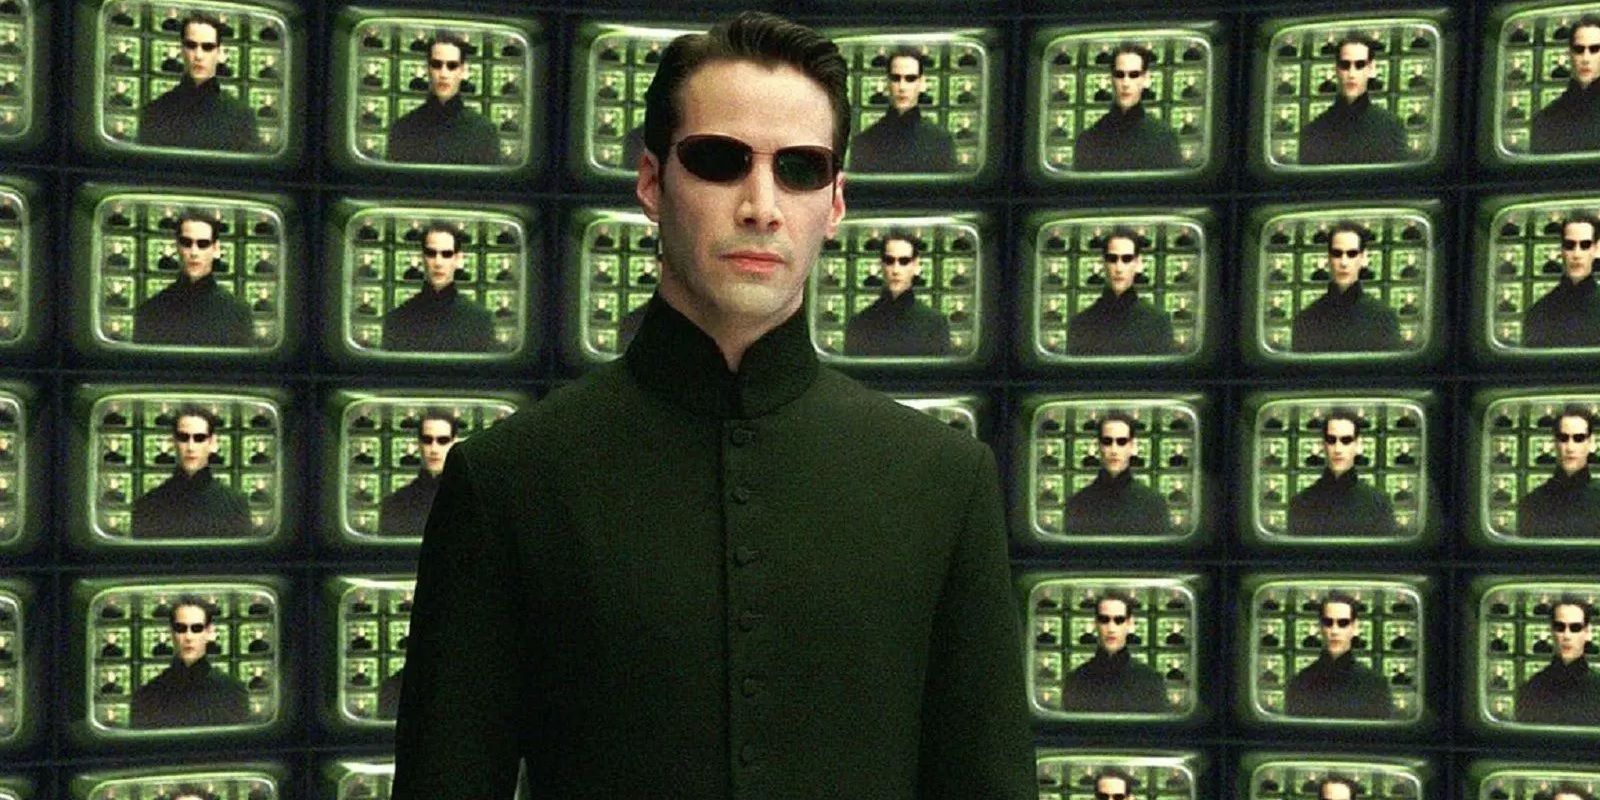 Neo speaks to the Architect in front of screens in The Matrix Reloaded